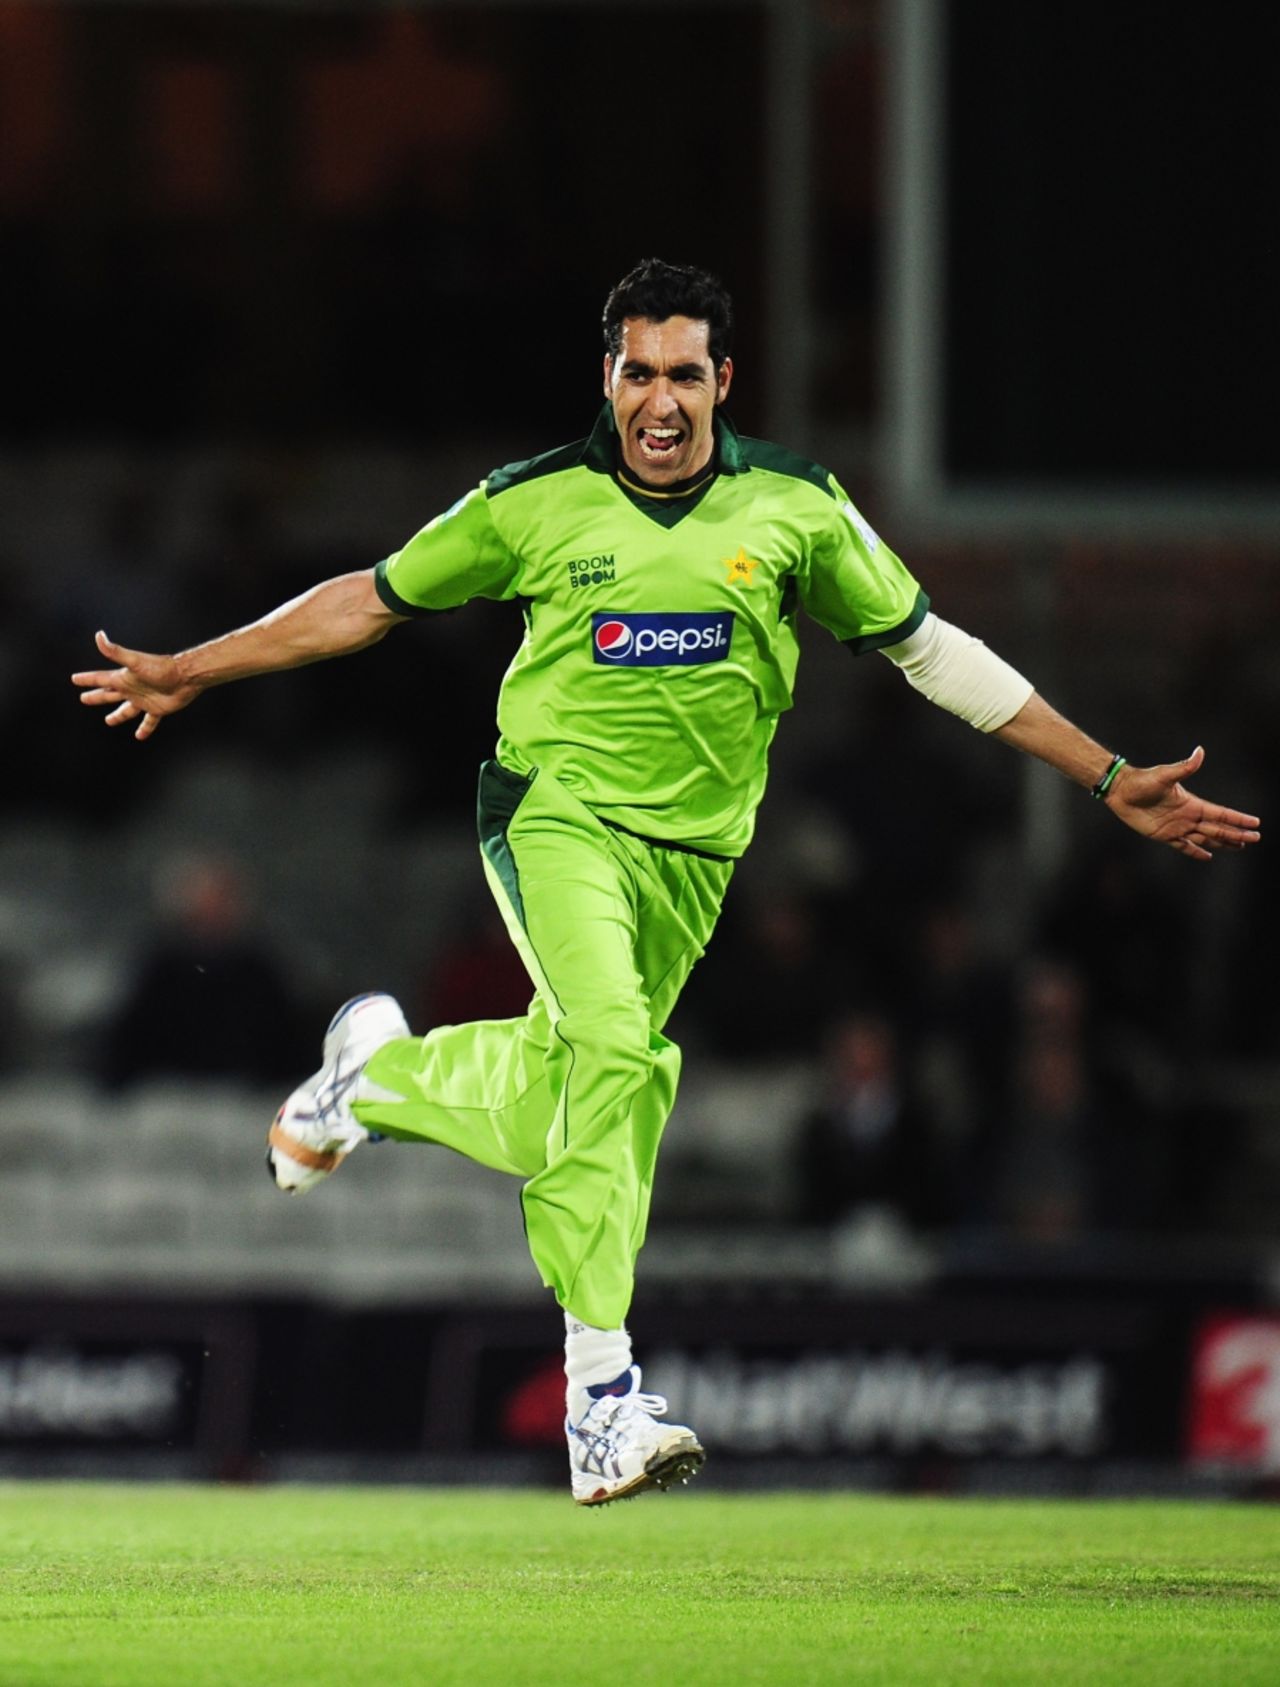 Umar Gul took Pakistan to the brink of victory with 6 for 42 at The Oval, England v Pakistan, 3rd ODI, The Oval, September 17 2010